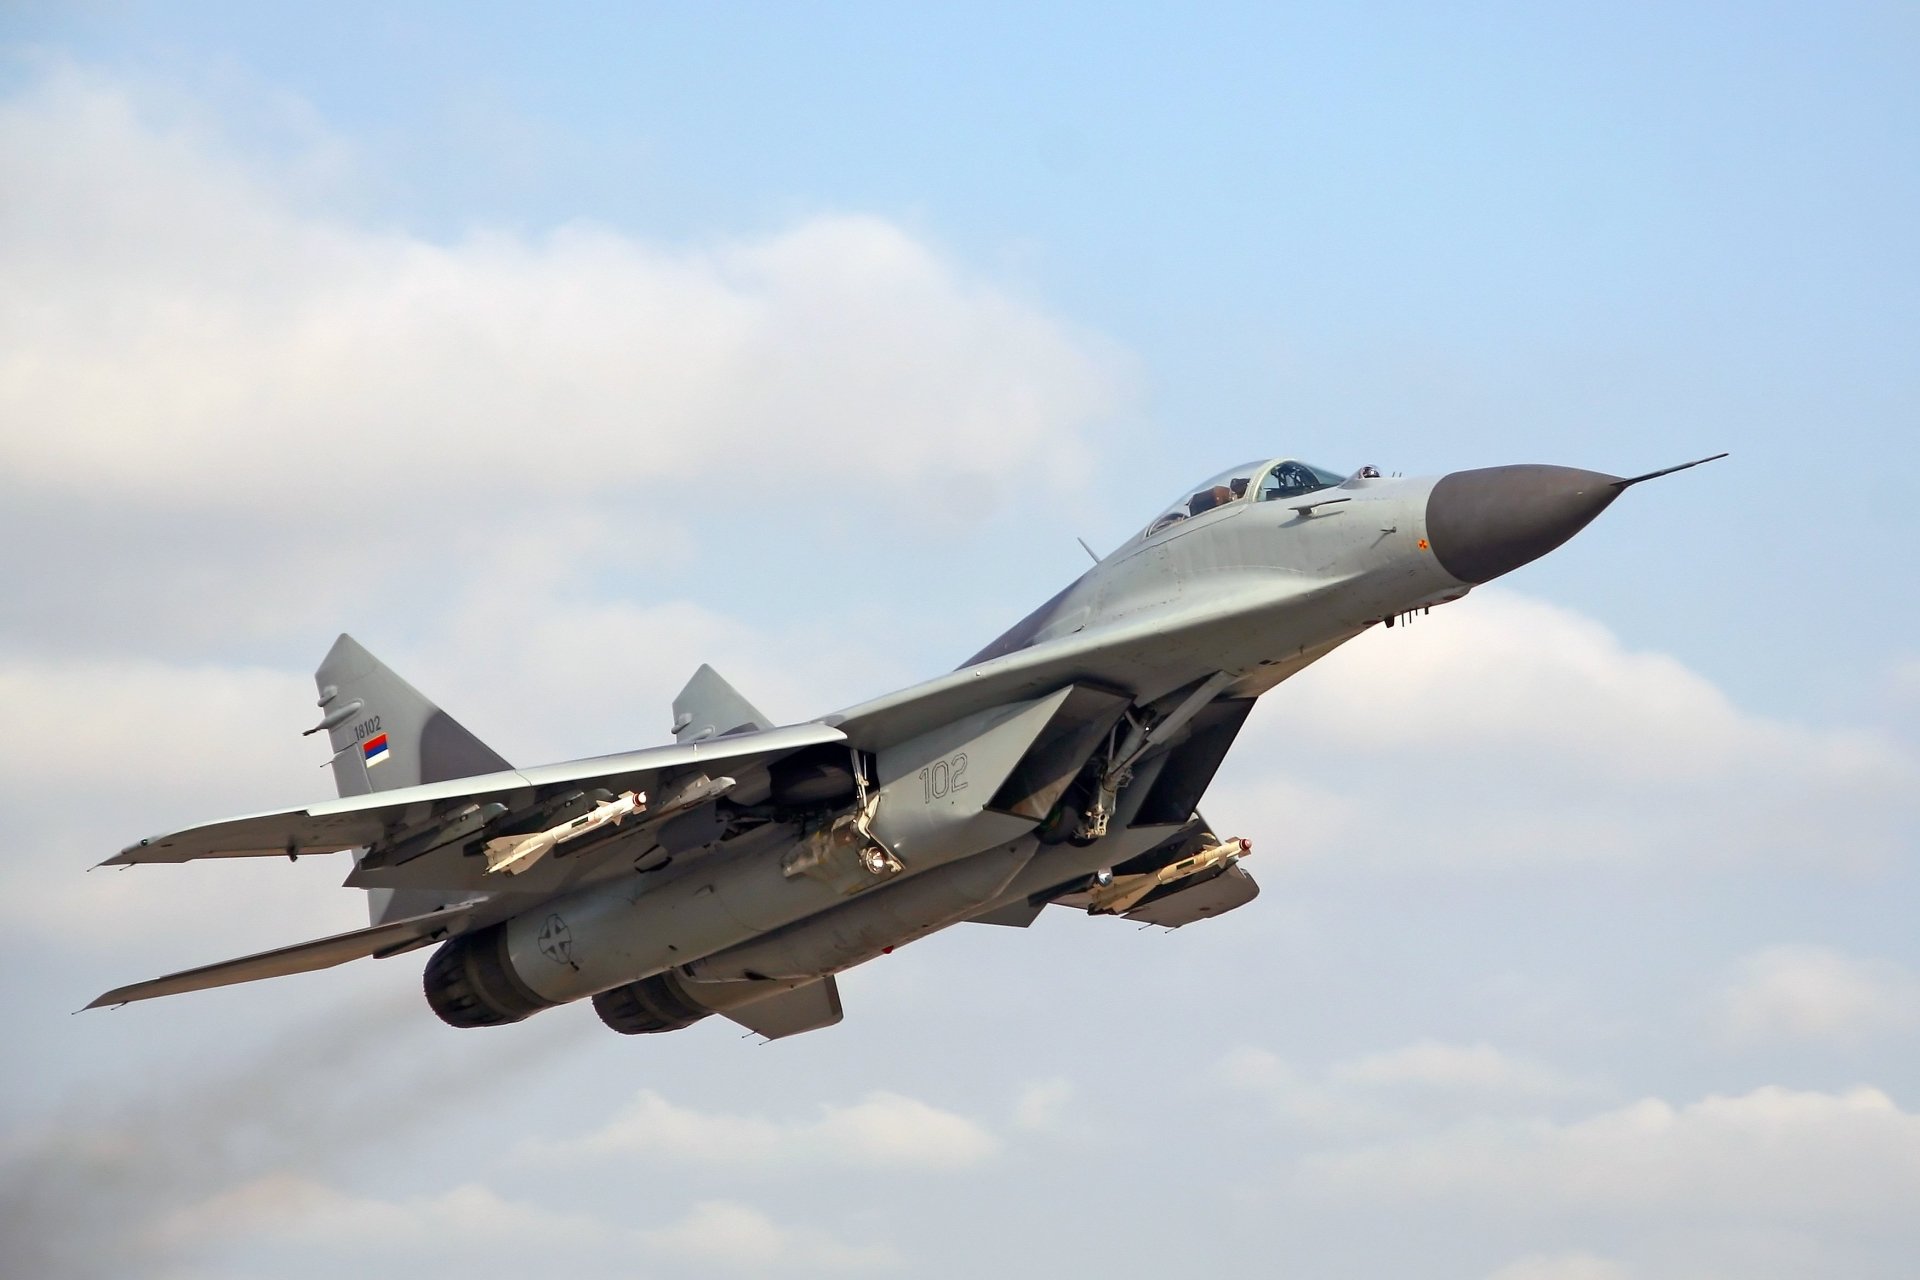 Mikoyan MiG-29 Jet Fighter Aircraft Wallpapers